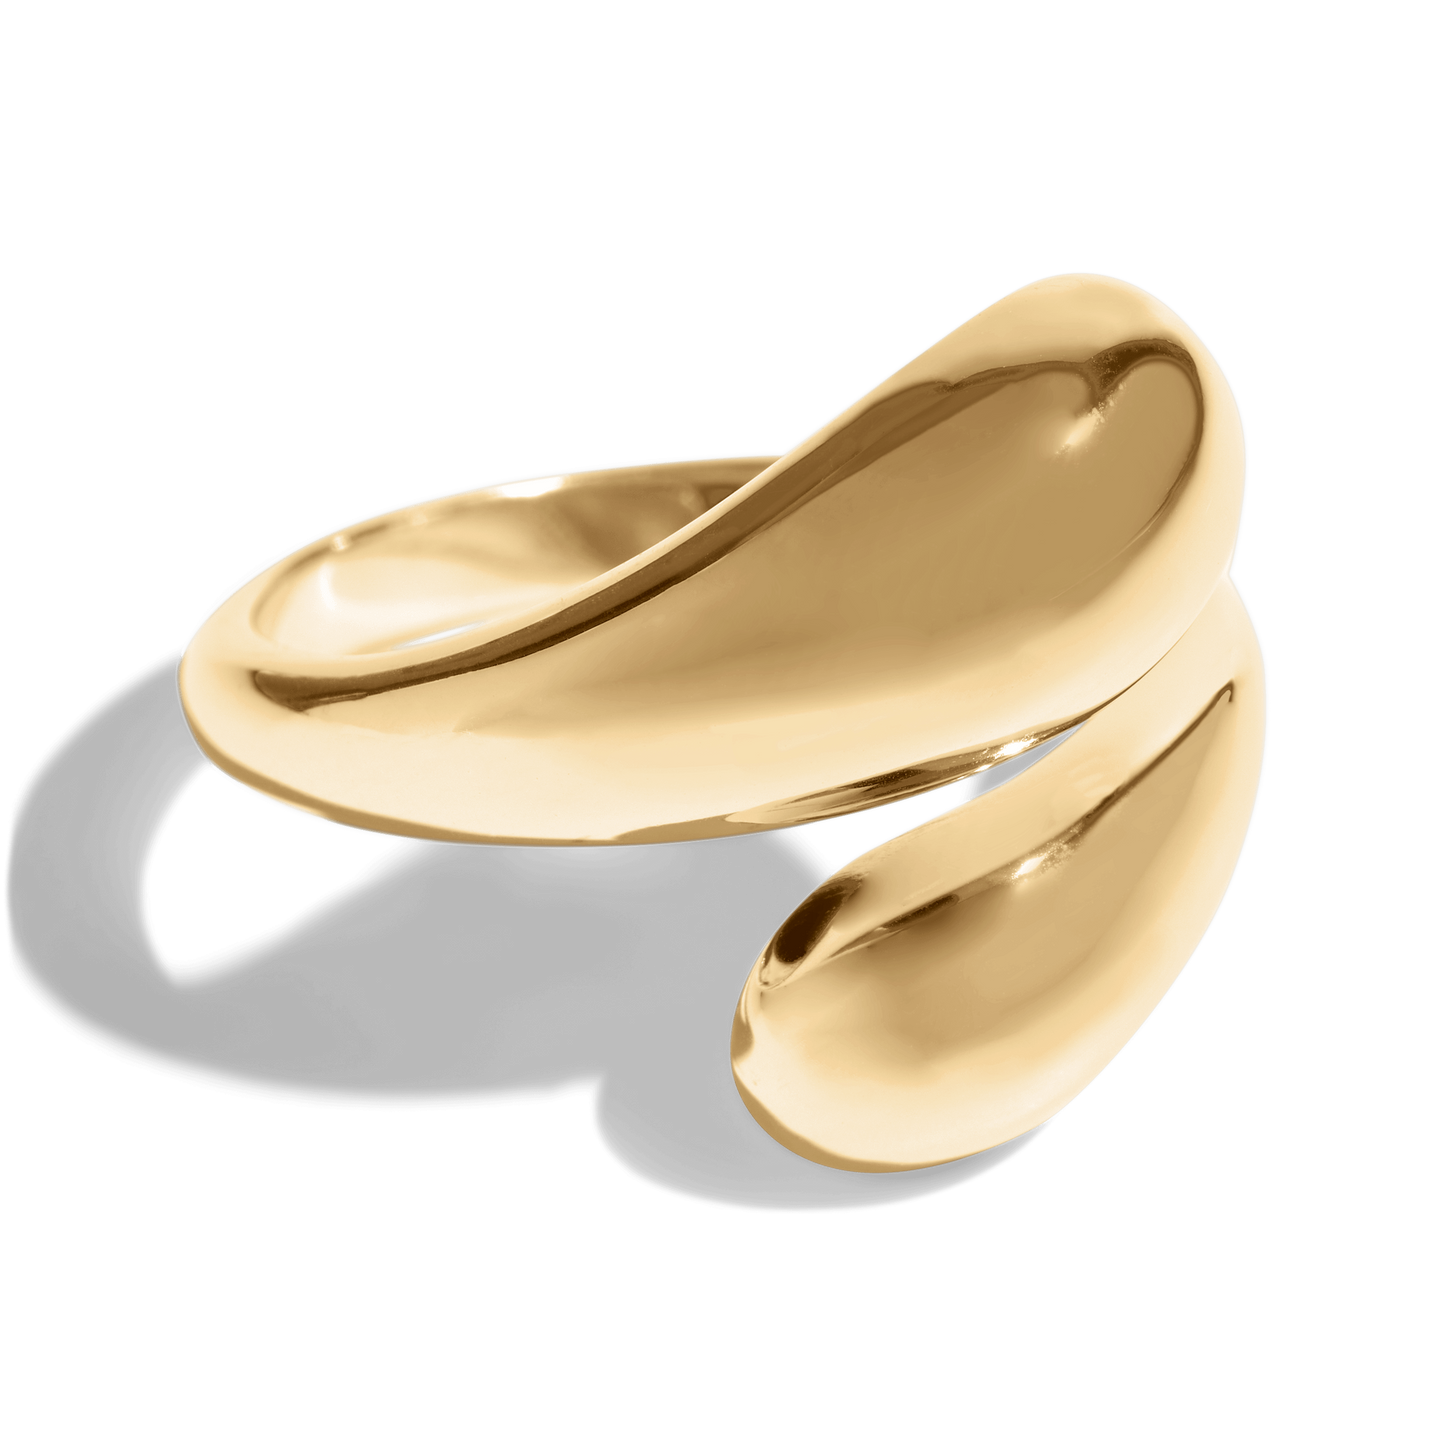 THE ONA RING - 18k gold plated